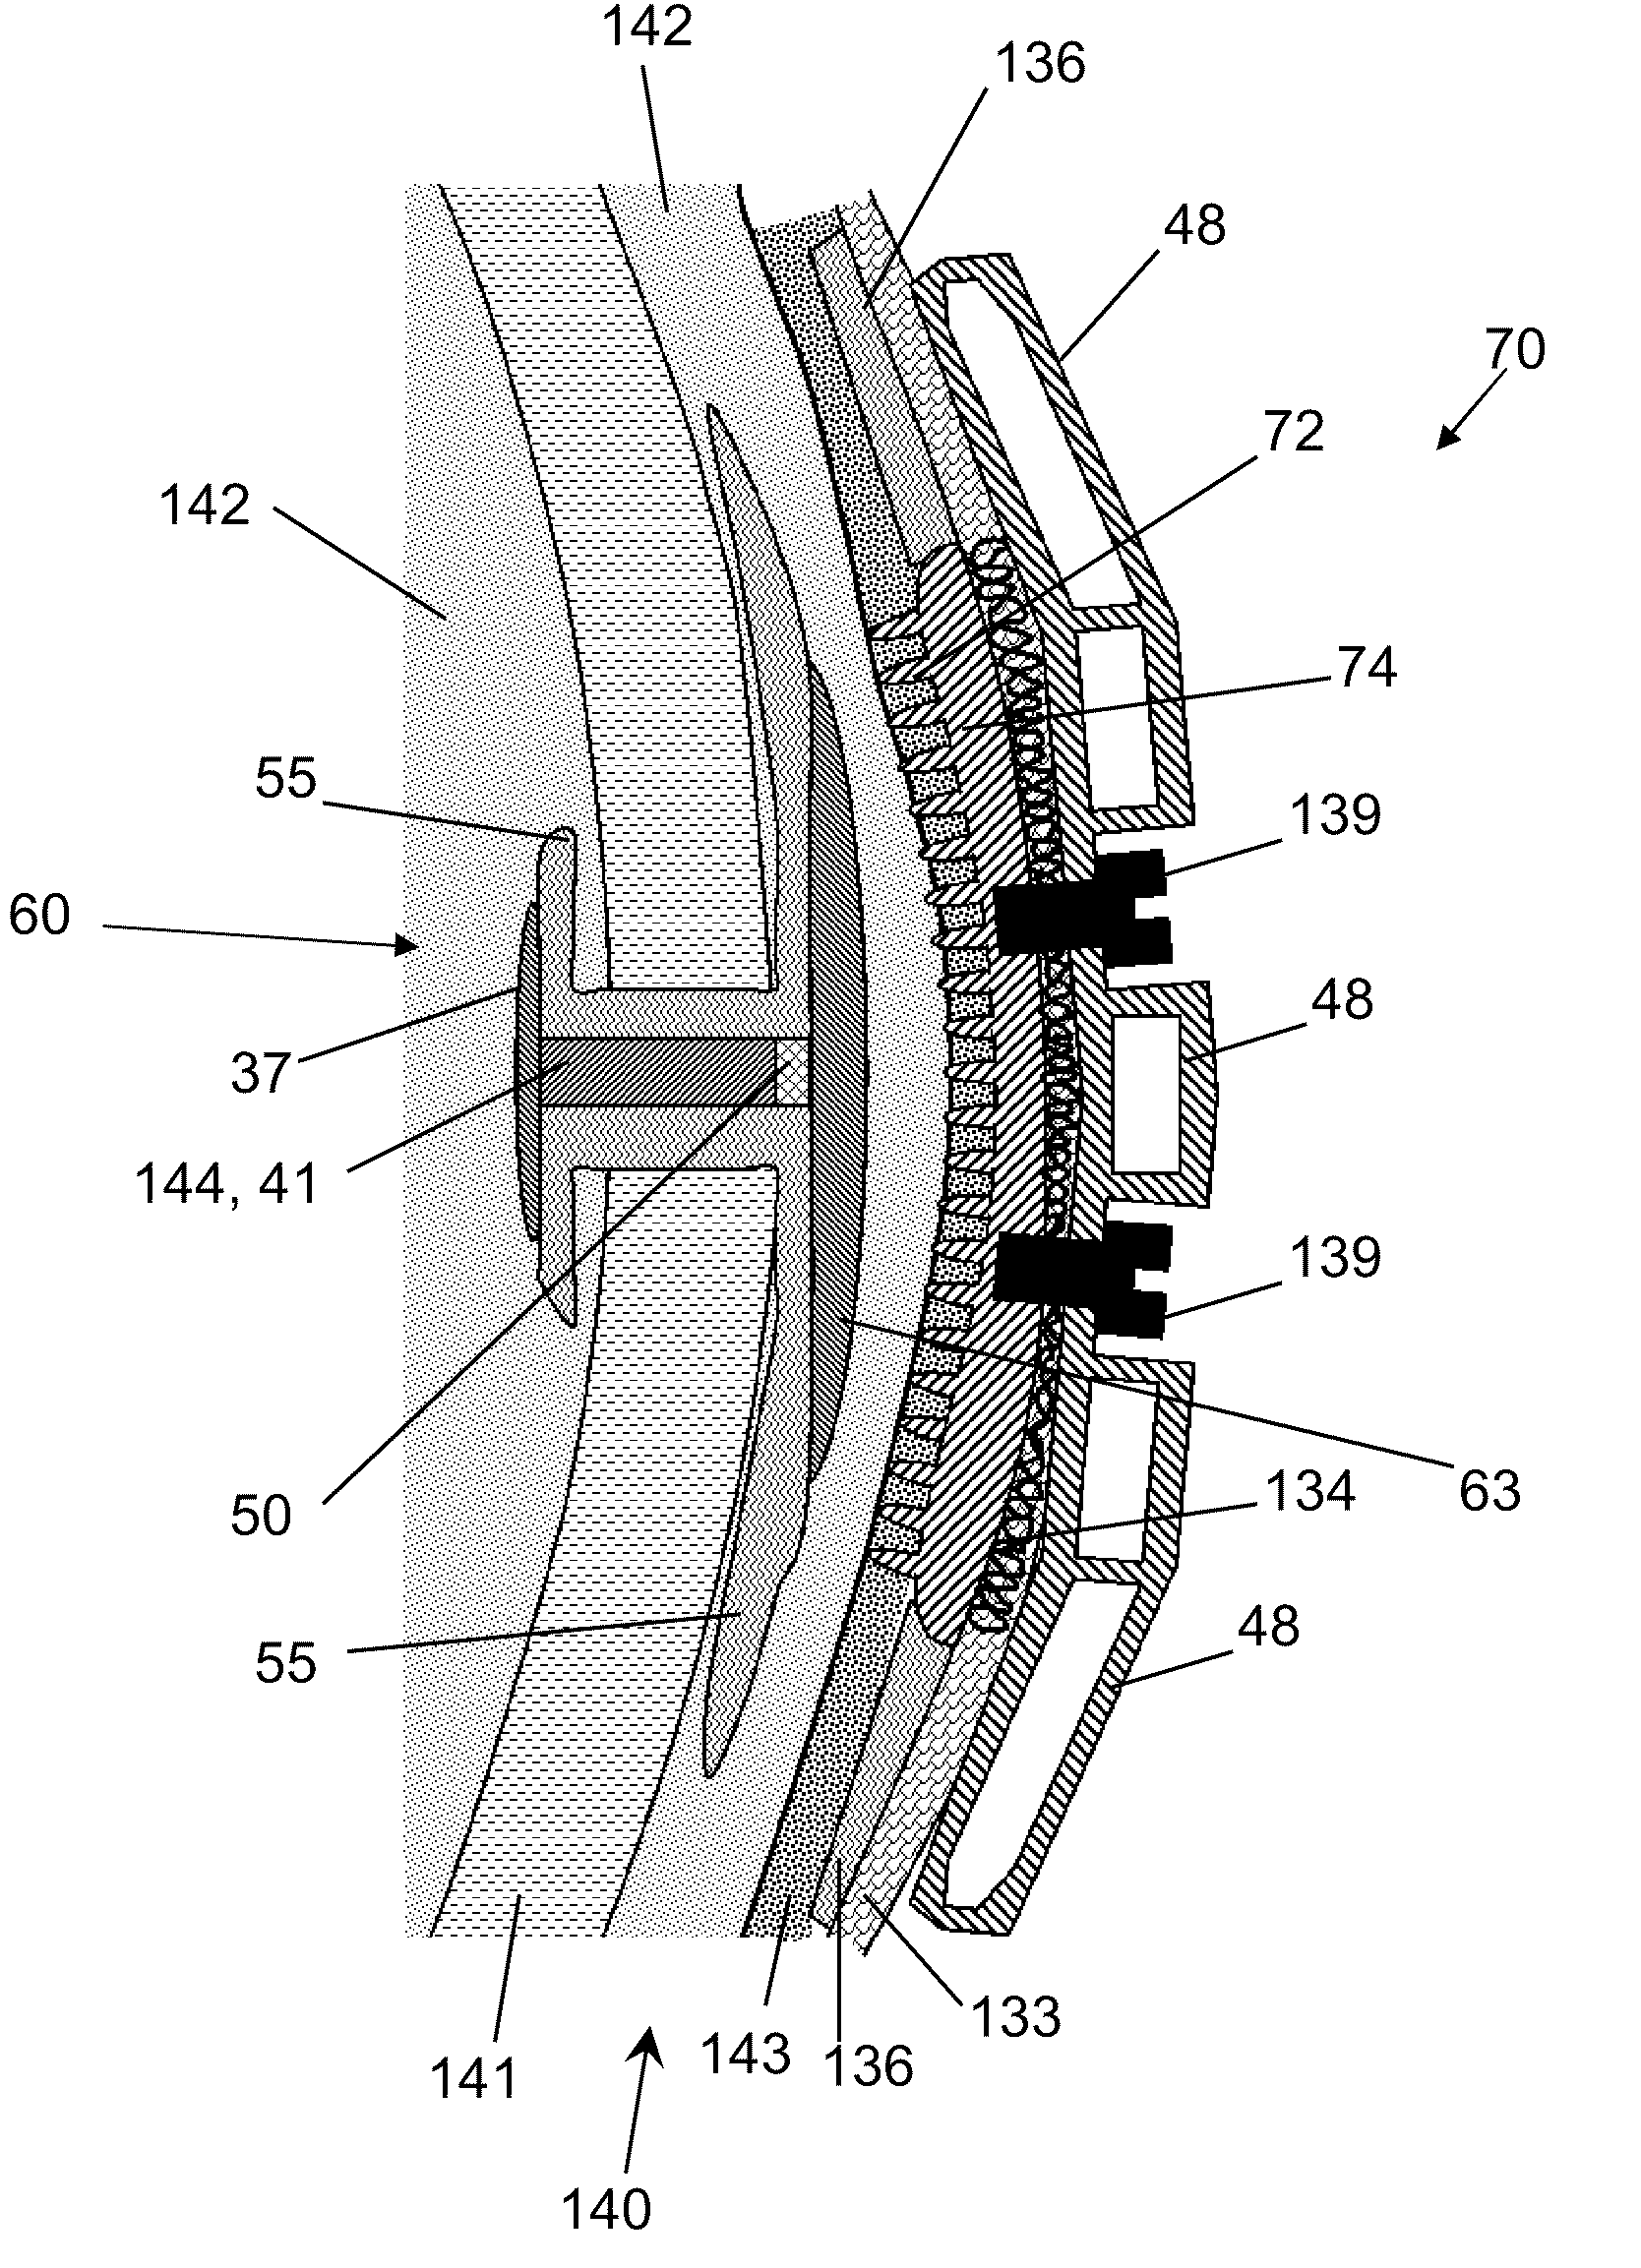 Thermoelectric Generator for Implants and Embedded Devices